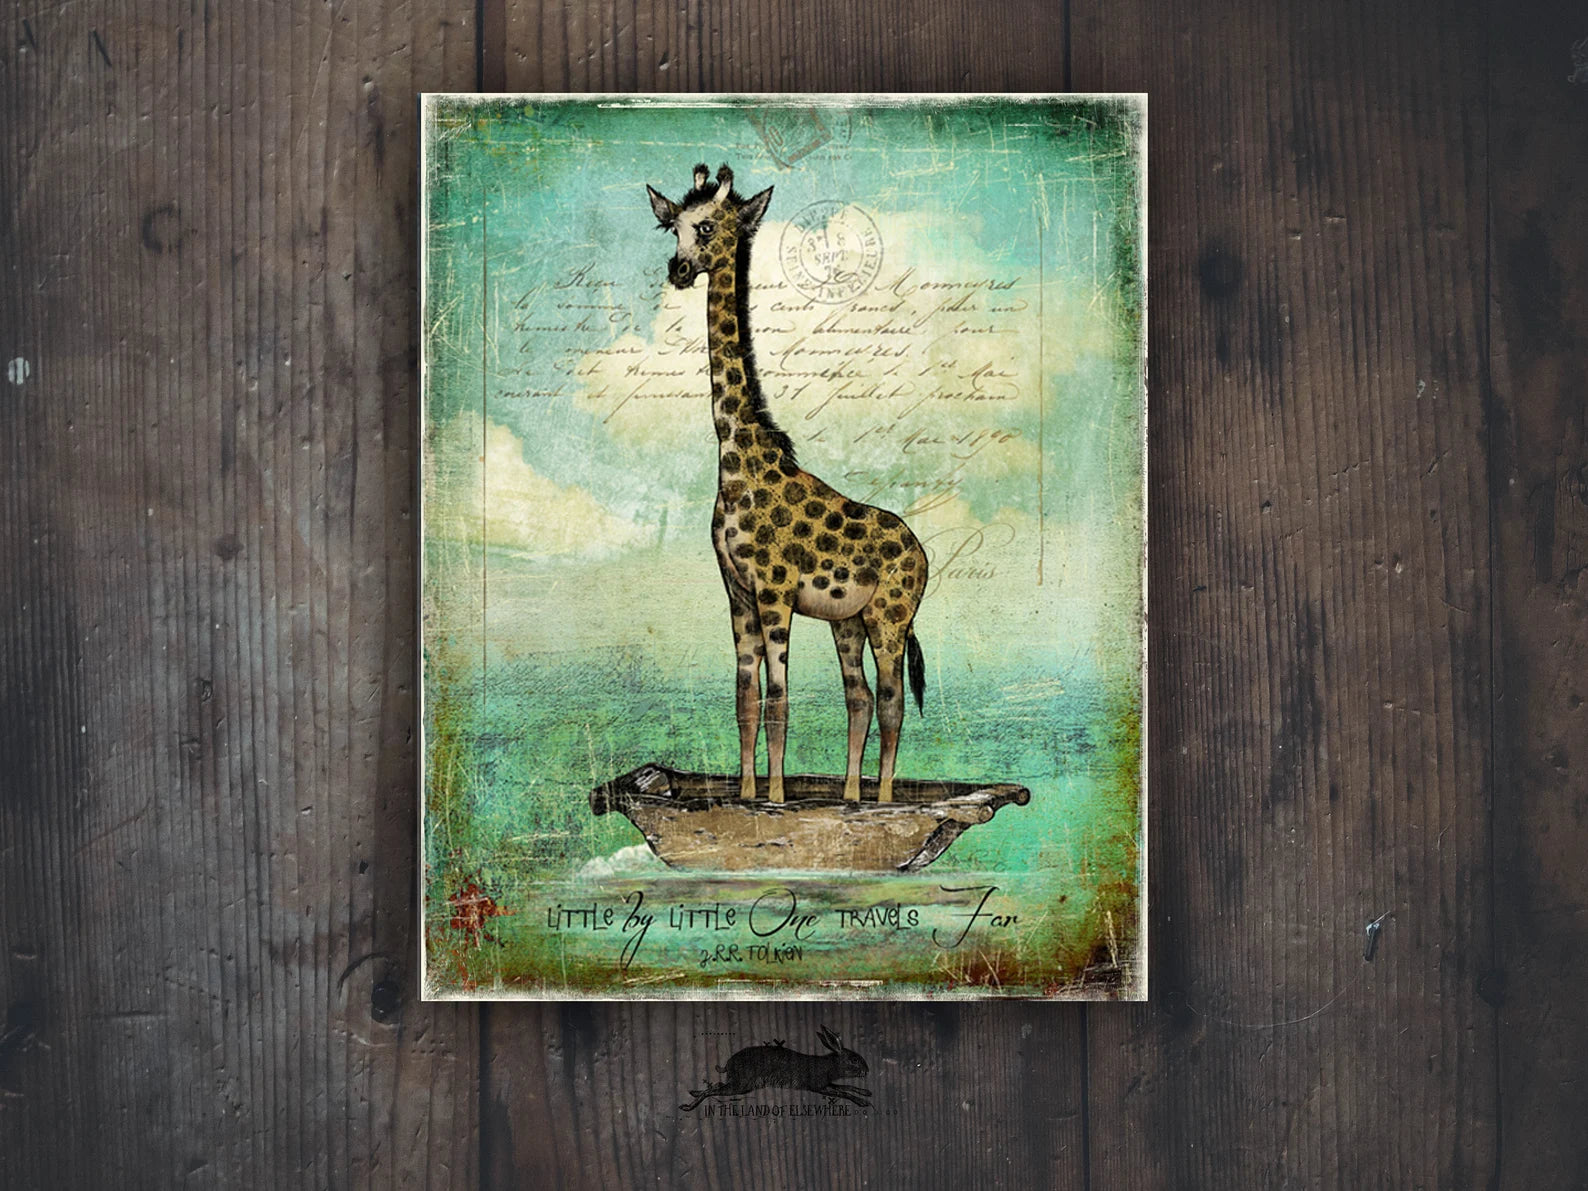 Elsewhere Canvas Art Prints {multiple sizes and styles}